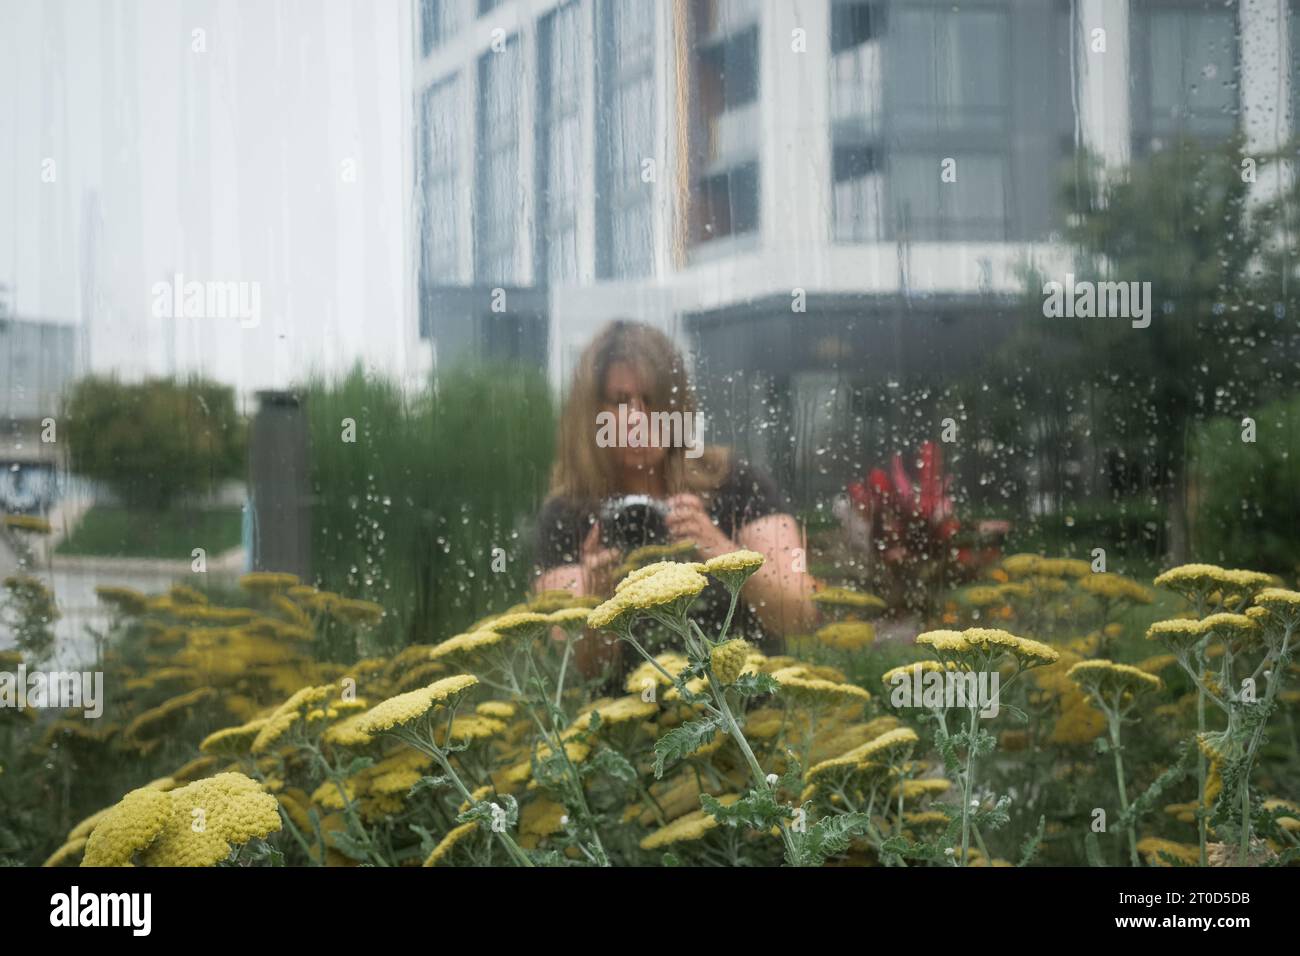 Portrait of woman taking photographs of flowers outside. Stock Photo